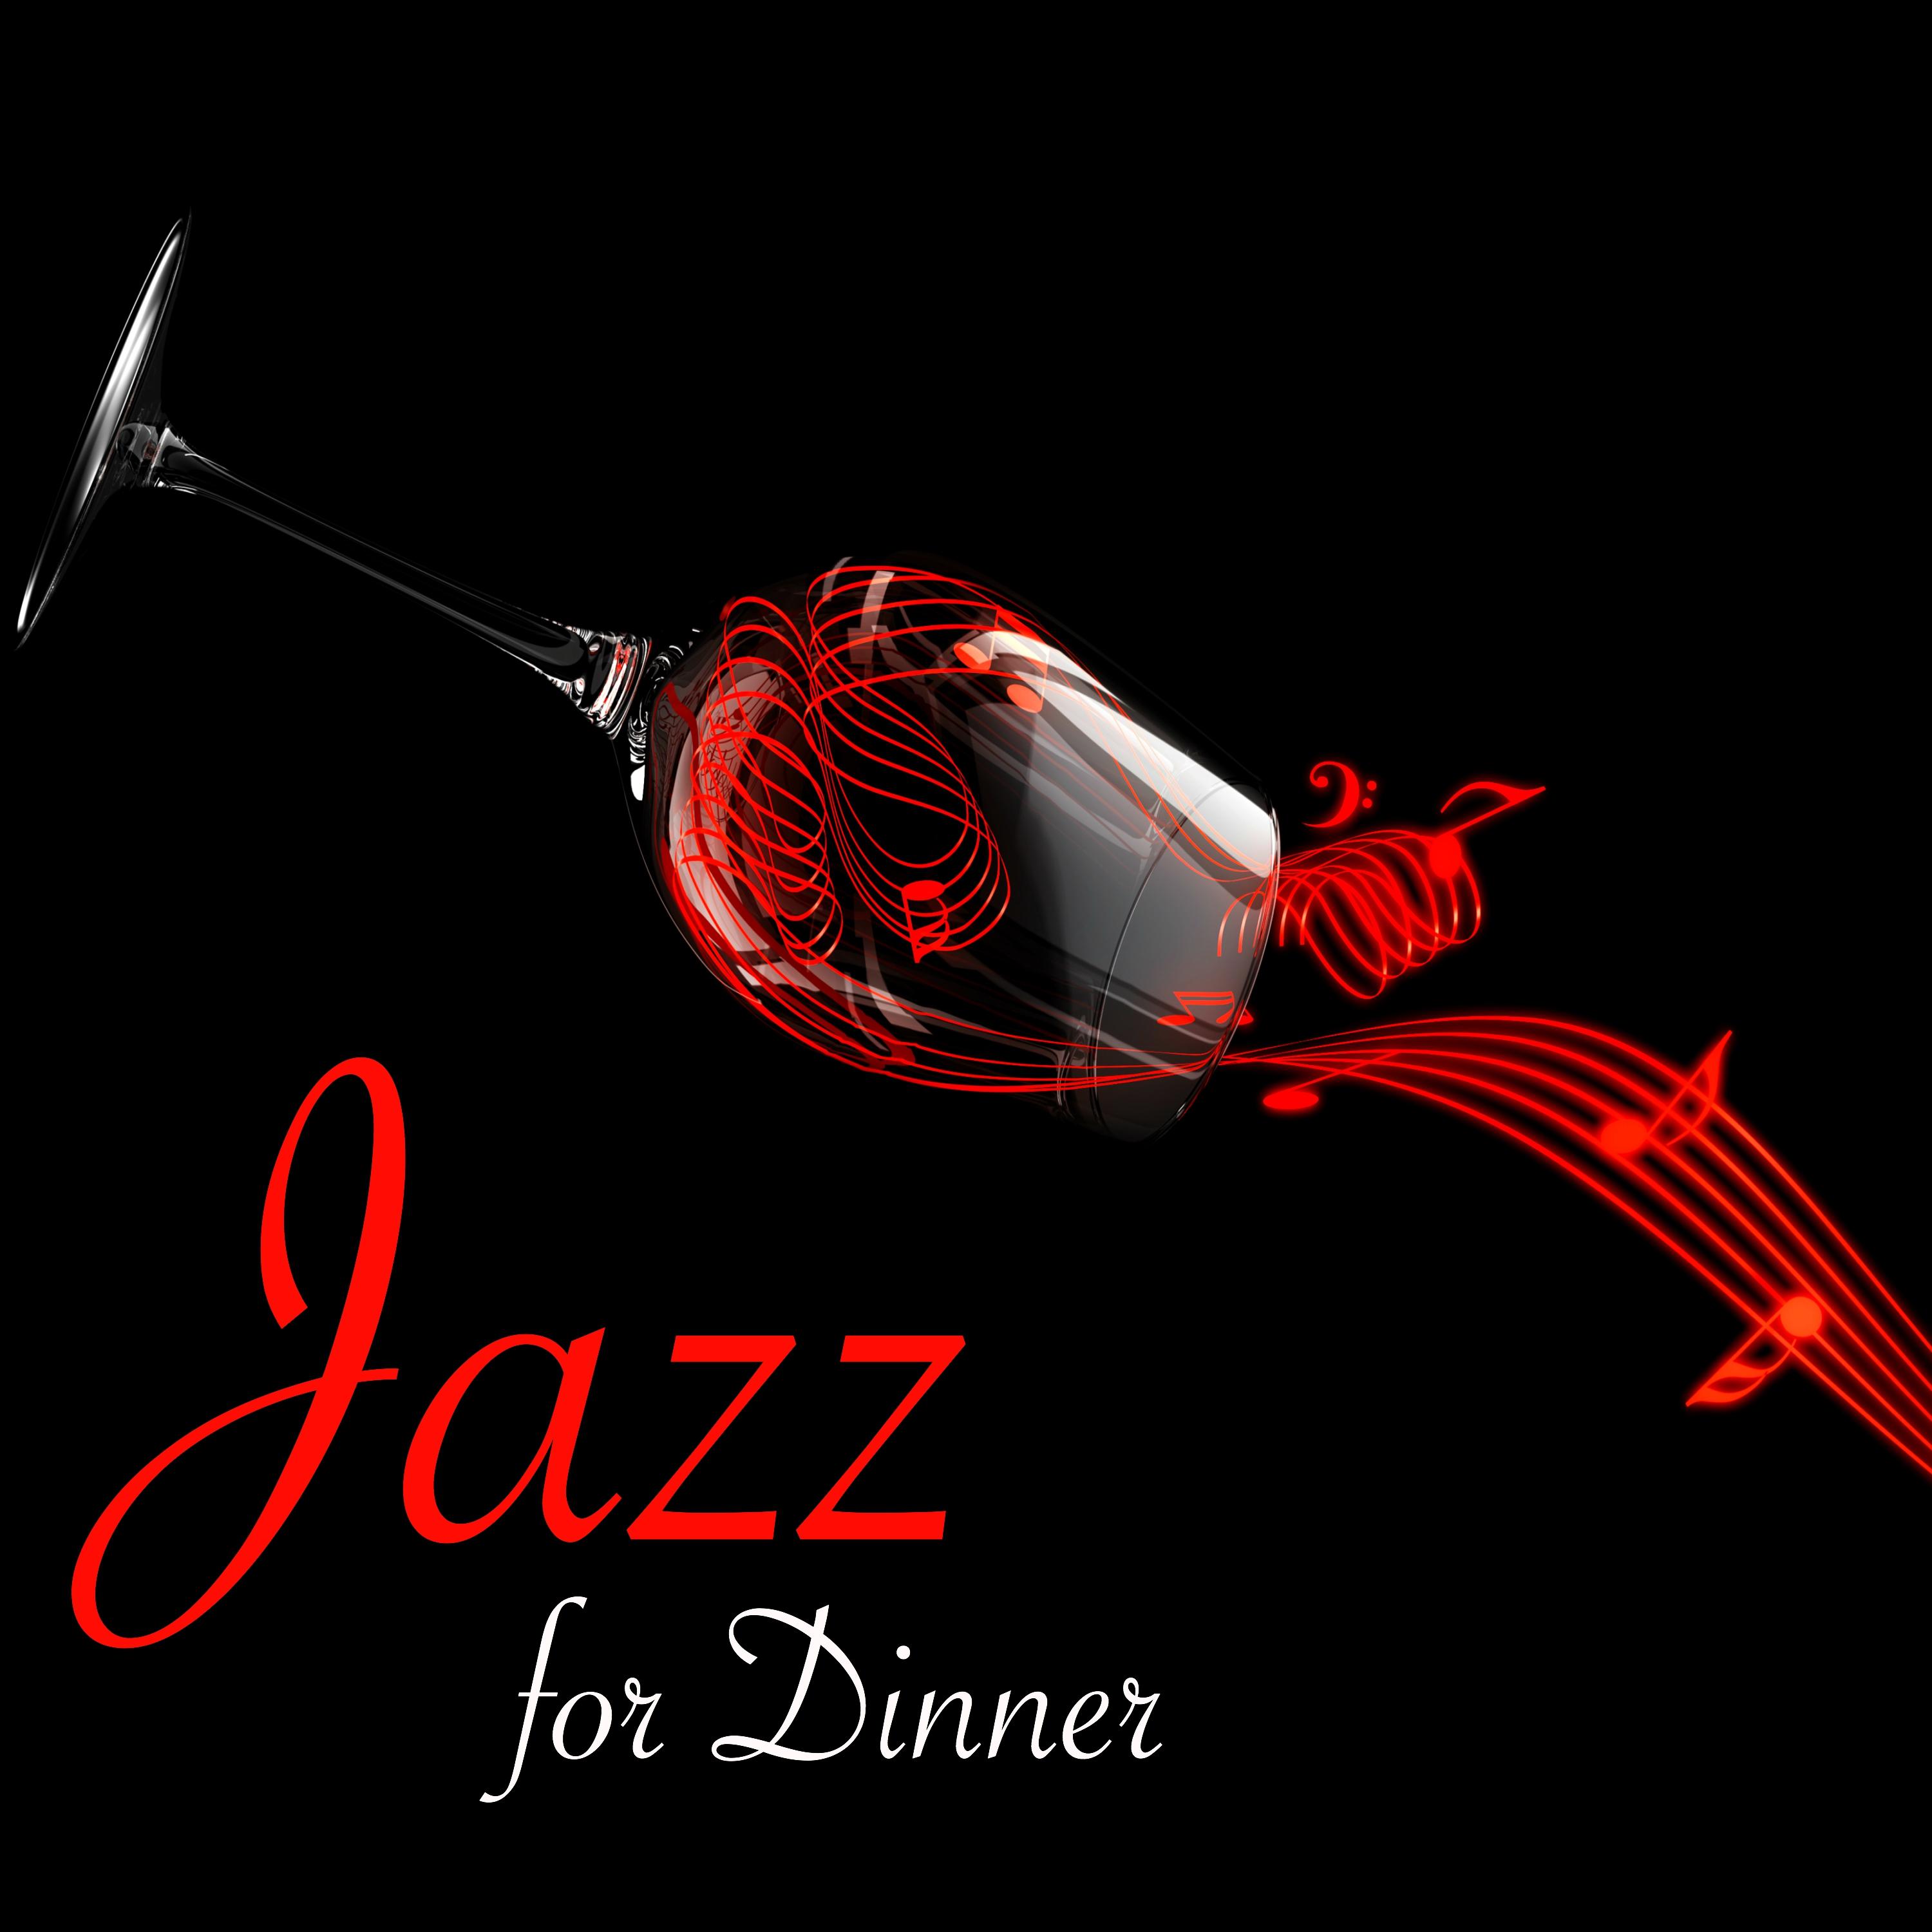 Jazz for Dinner  - Smooth Jazz & Piano Bar Music for Restaurant and Cocktails